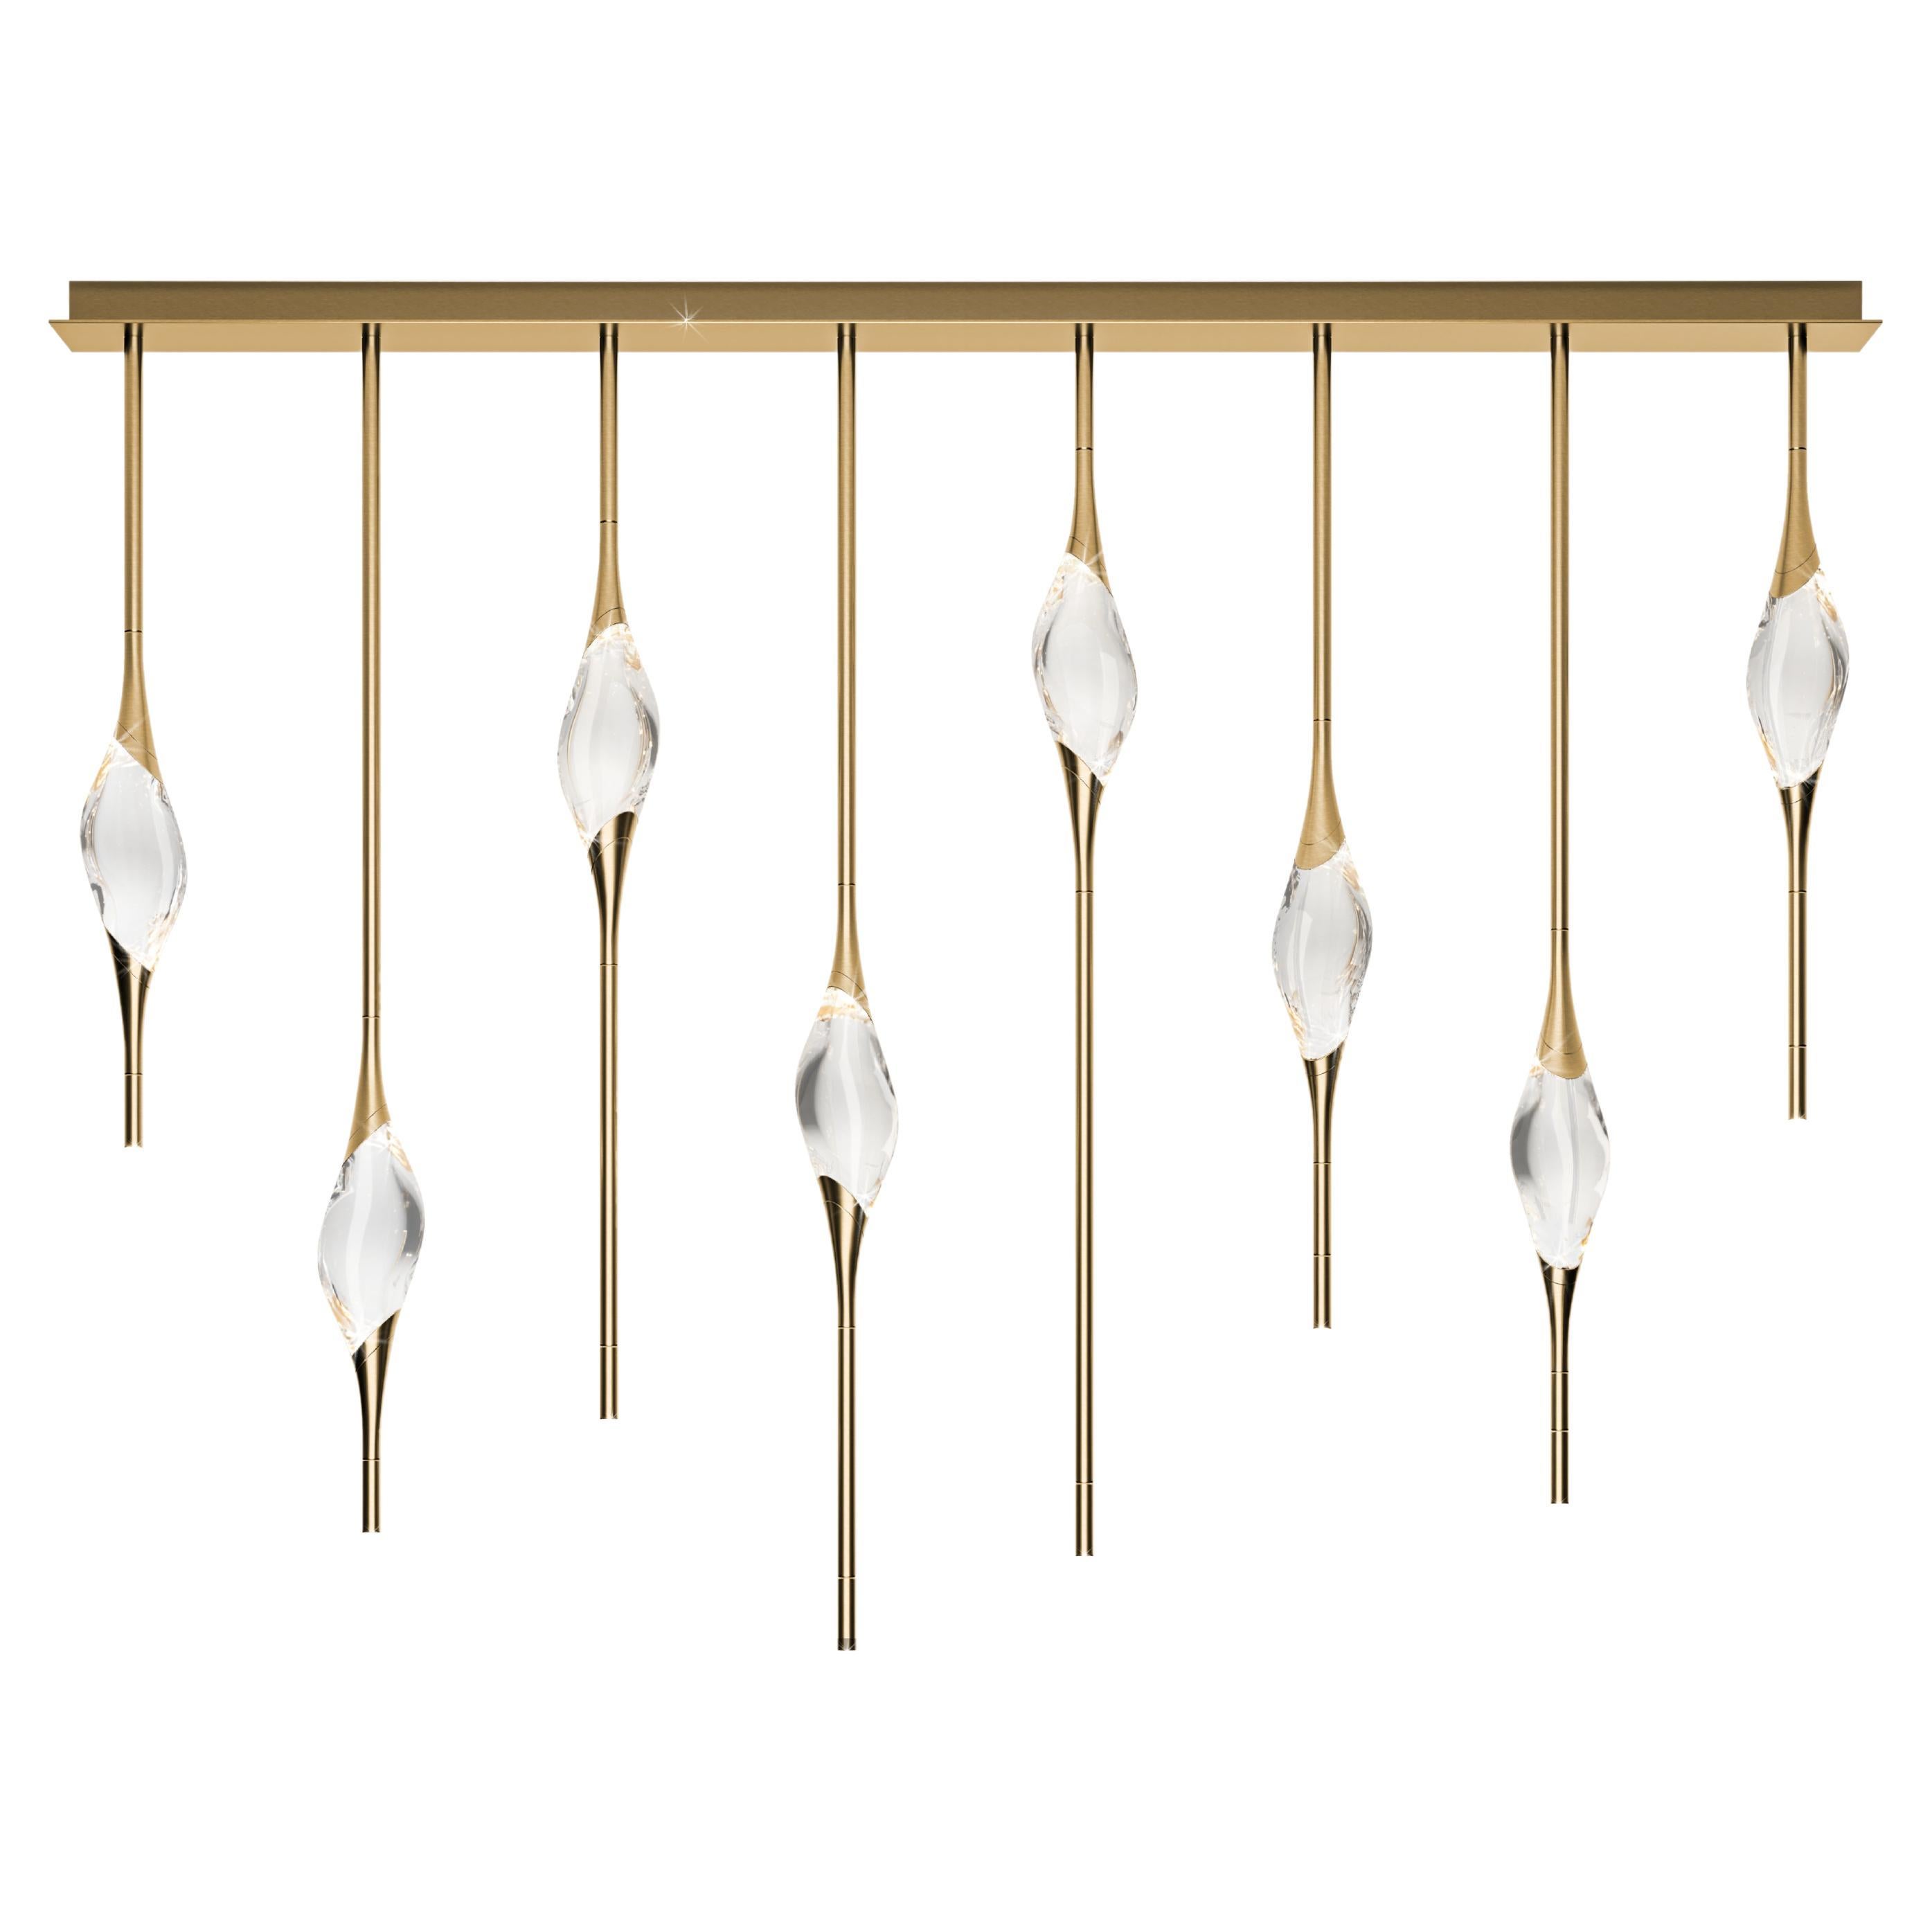 "Il Pezzo 12 Staggered Chandelier" - length 160cm/63” - polished brass - crystal